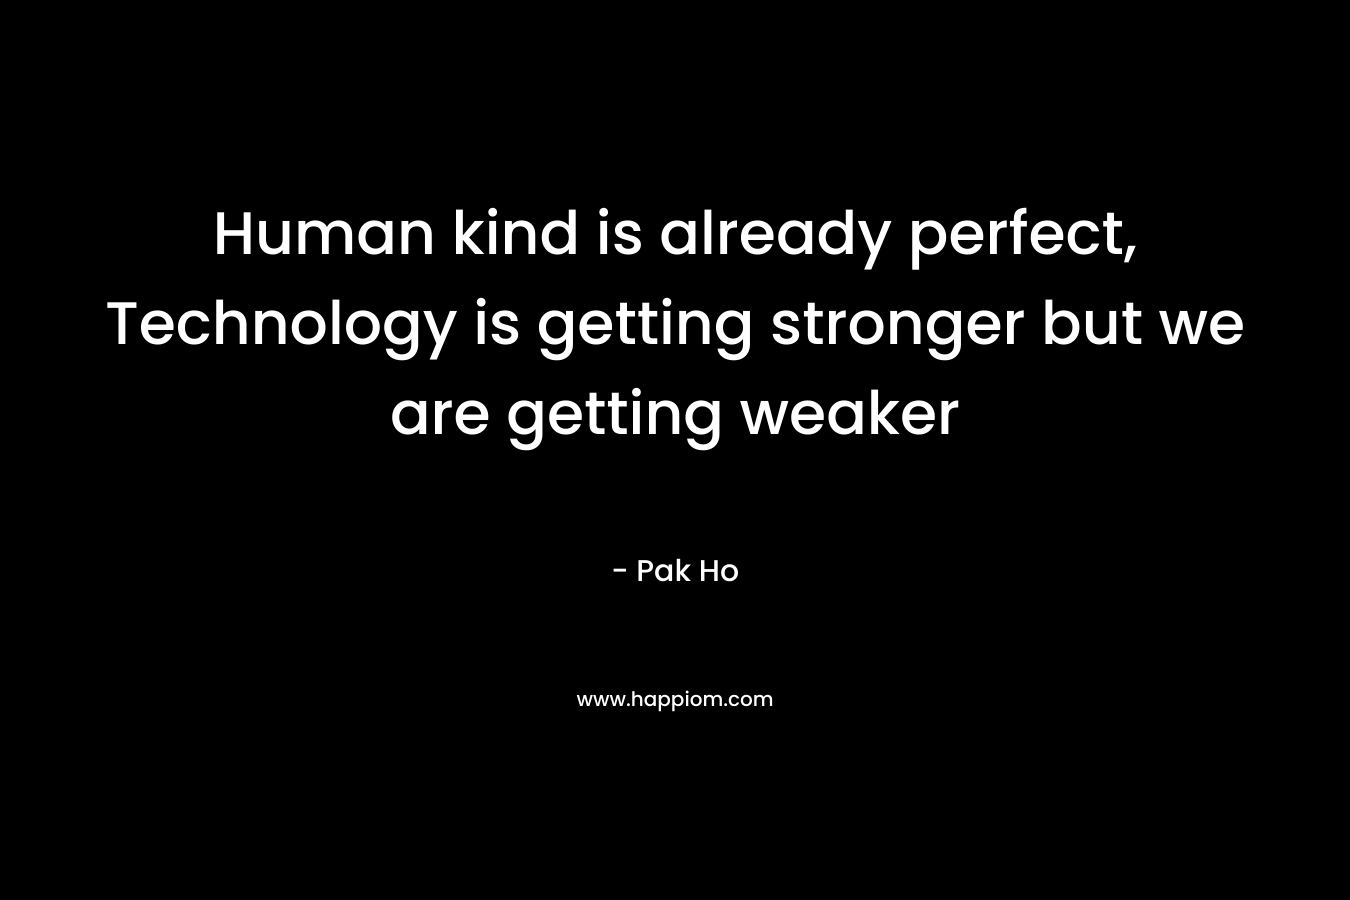 Human kind is already perfect, Technology is getting stronger but we are getting weaker